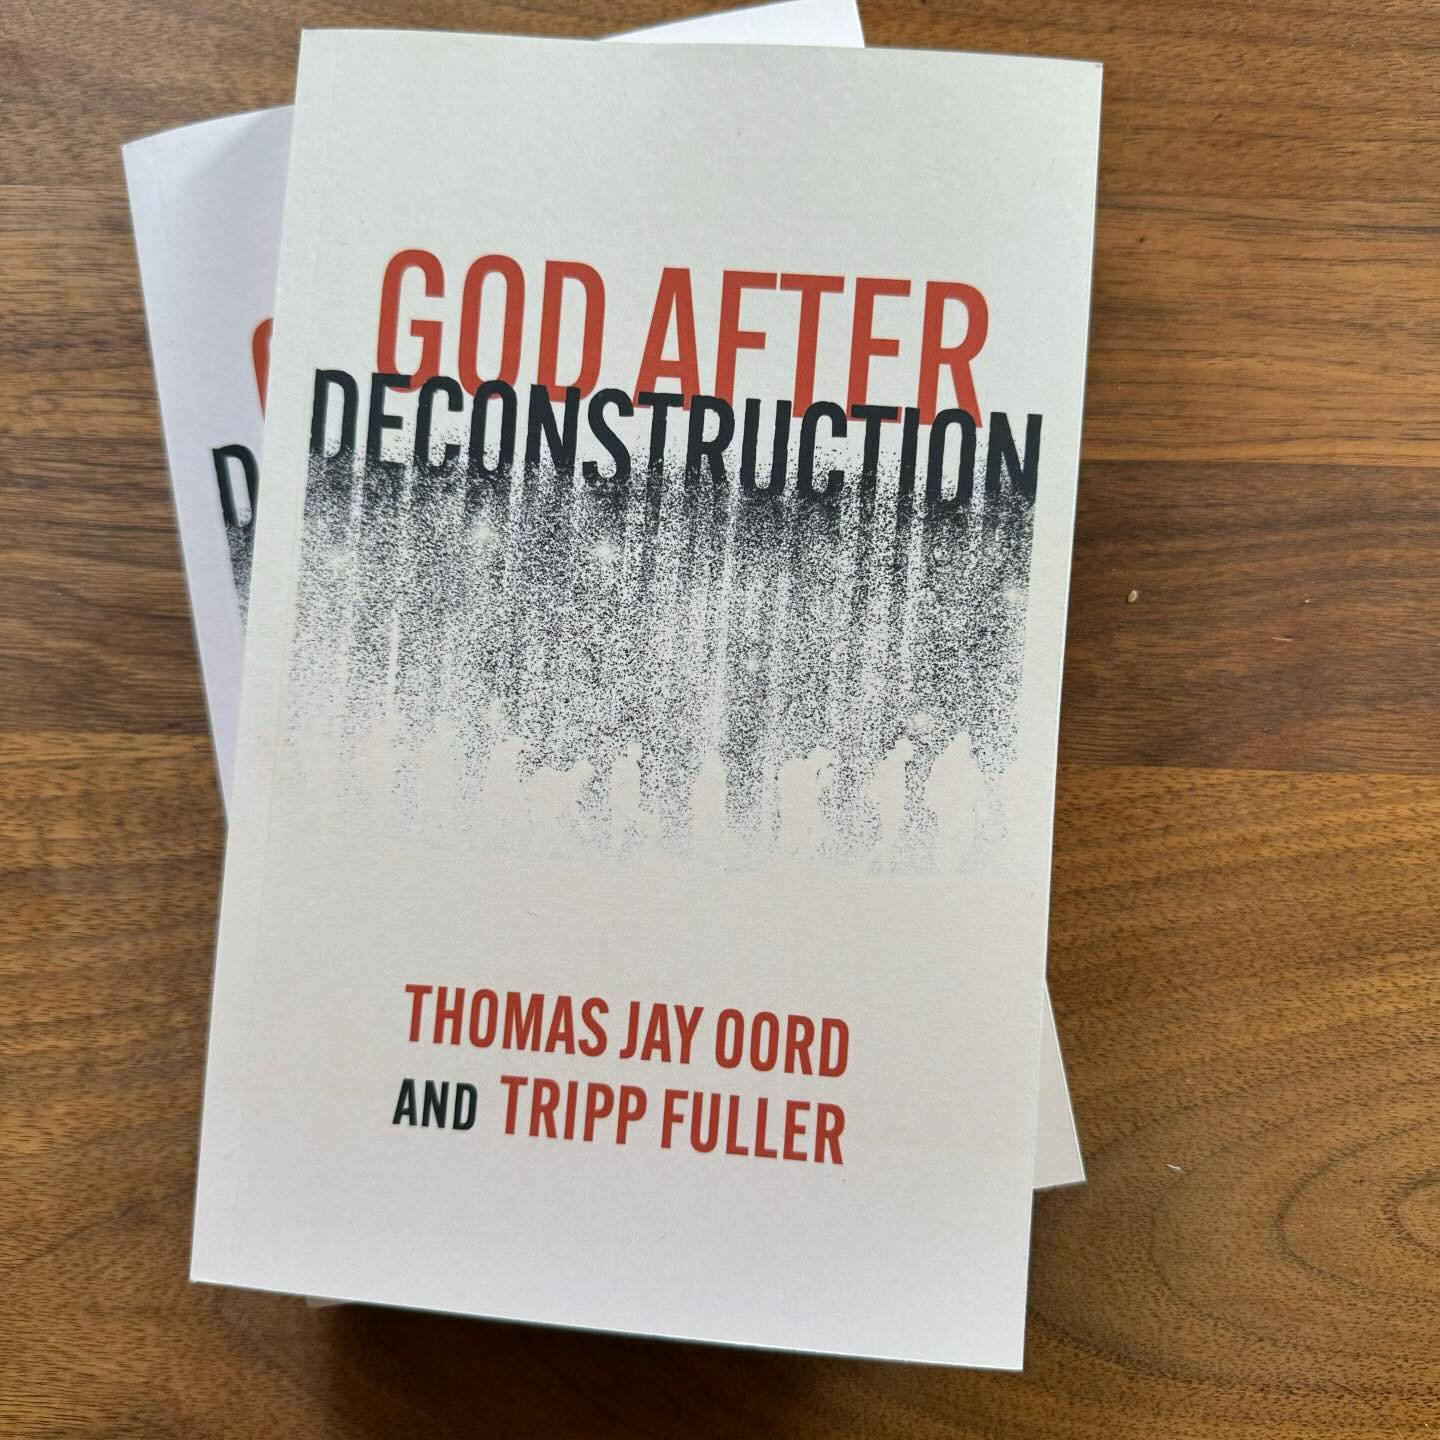 I ended up with an extra copy of the new book that my friend @thomasjayoord coauthored with @theologynerd. I&rsquo;d love to send it to someone as a gift. Drop a comment 👇 letting us know you&rsquo;ll read it and we&rsquo;ll randomly pick someone to